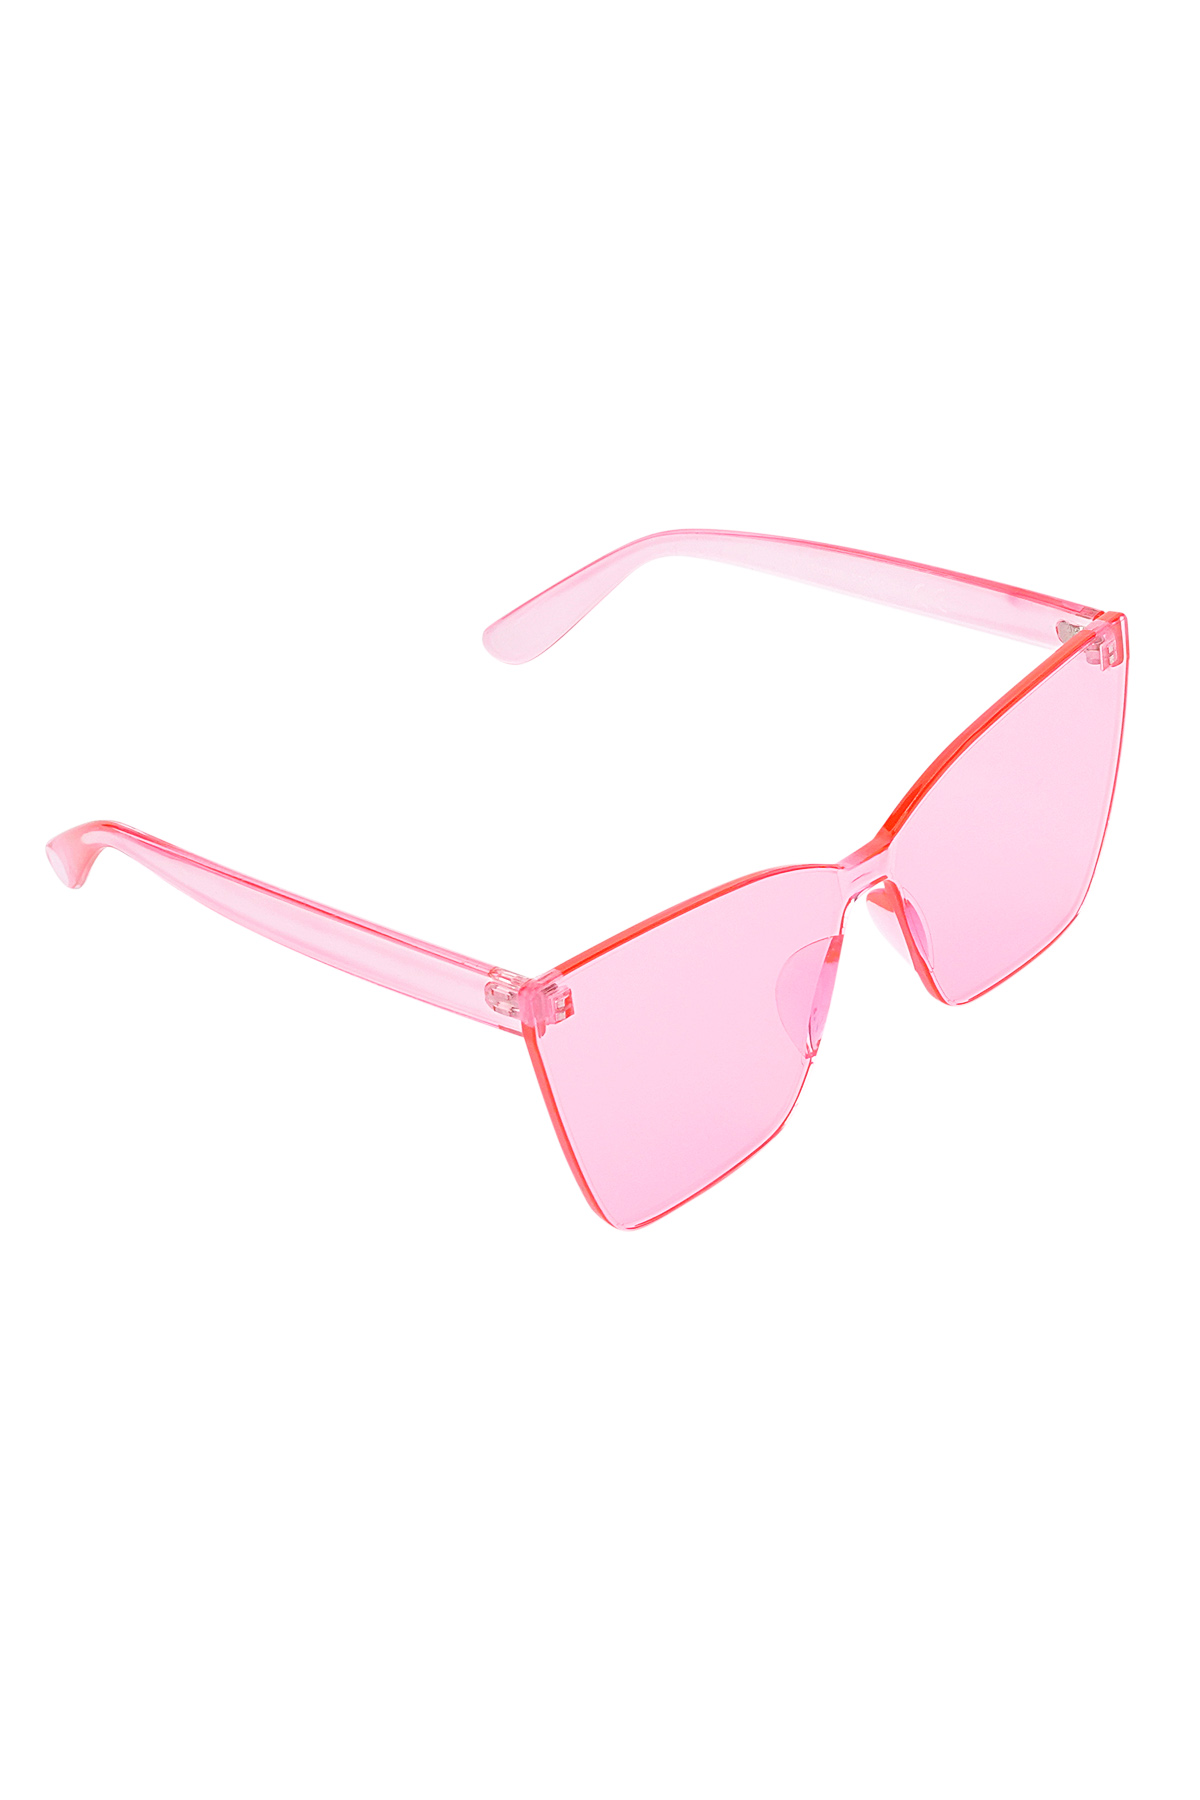 Single-color daily sunglasses - pink h5 